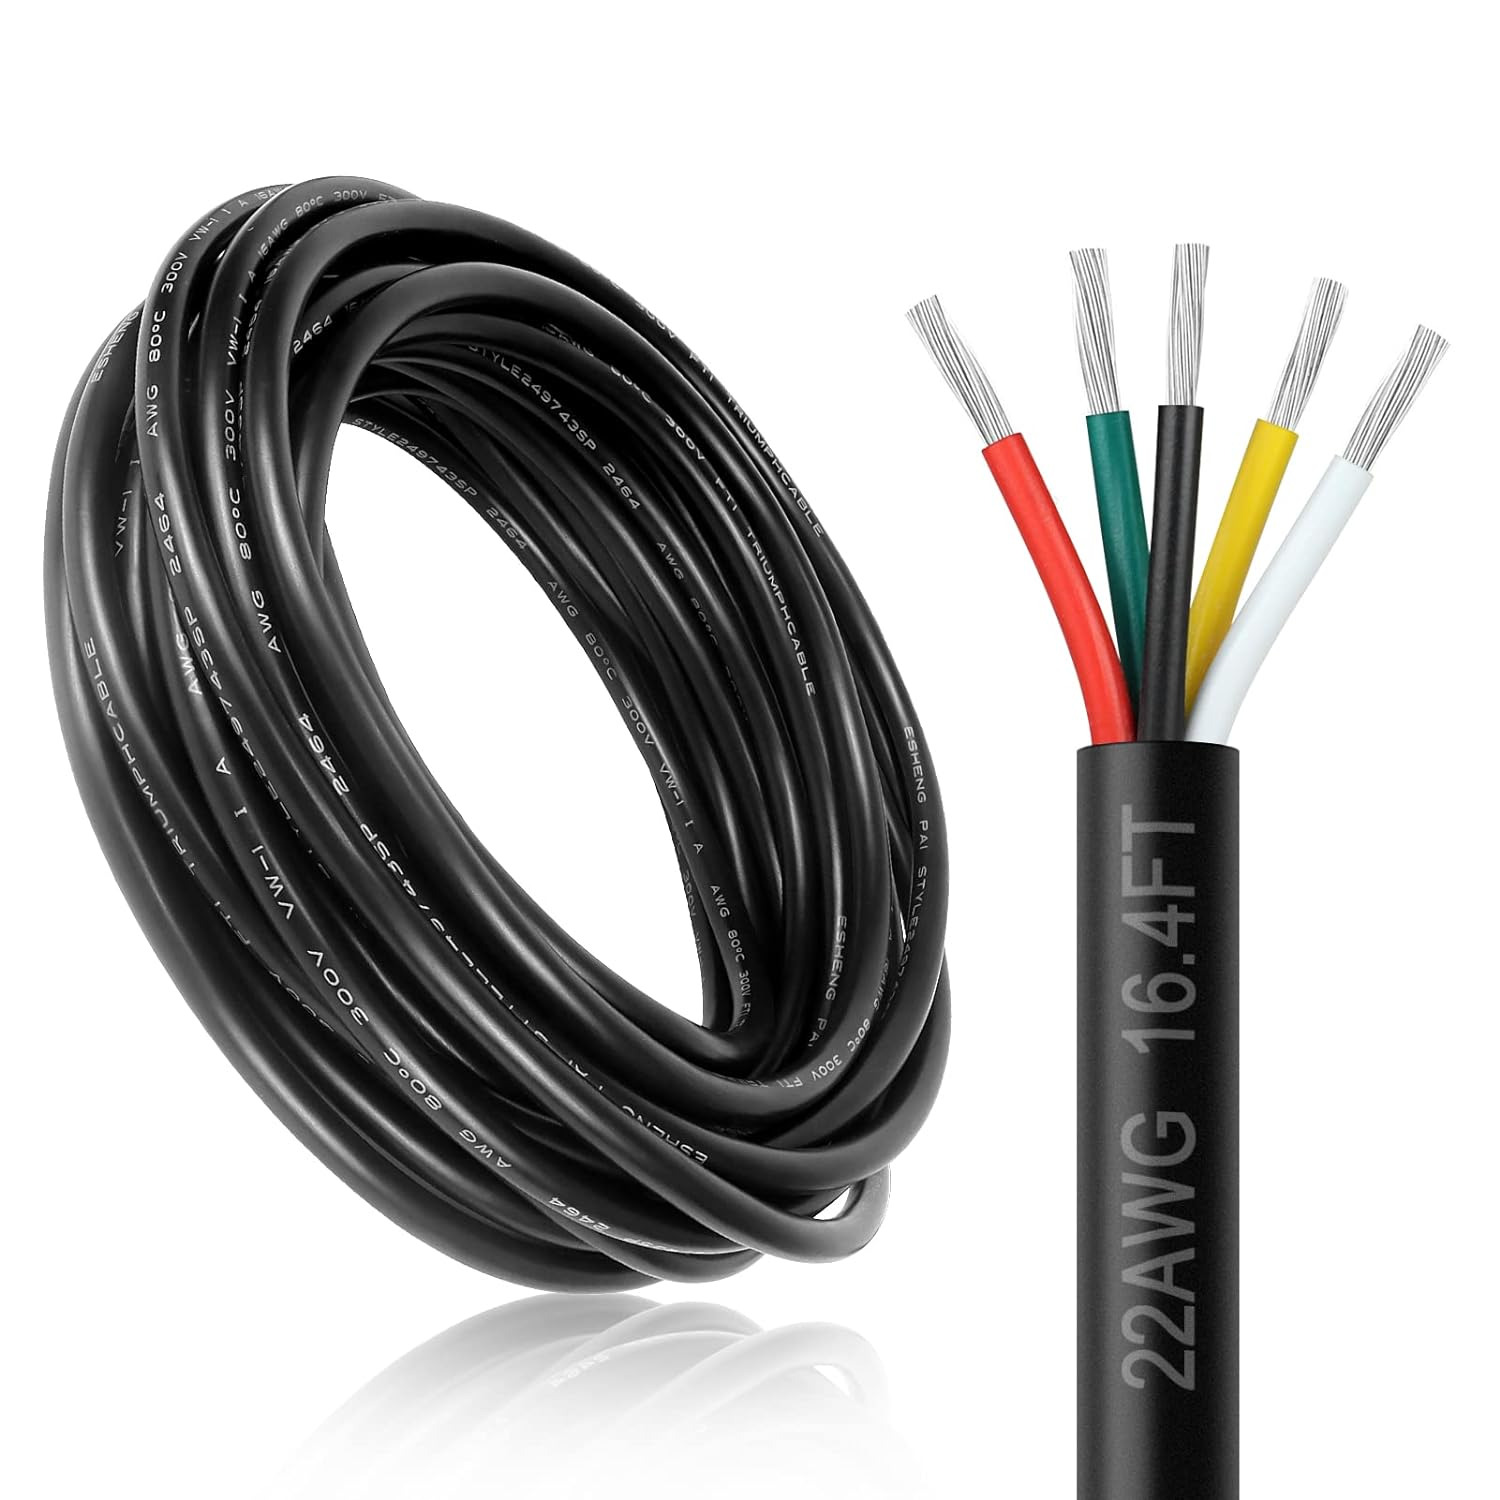 22 Gauge 5 Conductor Electrical Wire, 16.4FT 22AWG Black PVC Stranded Tinned Cop